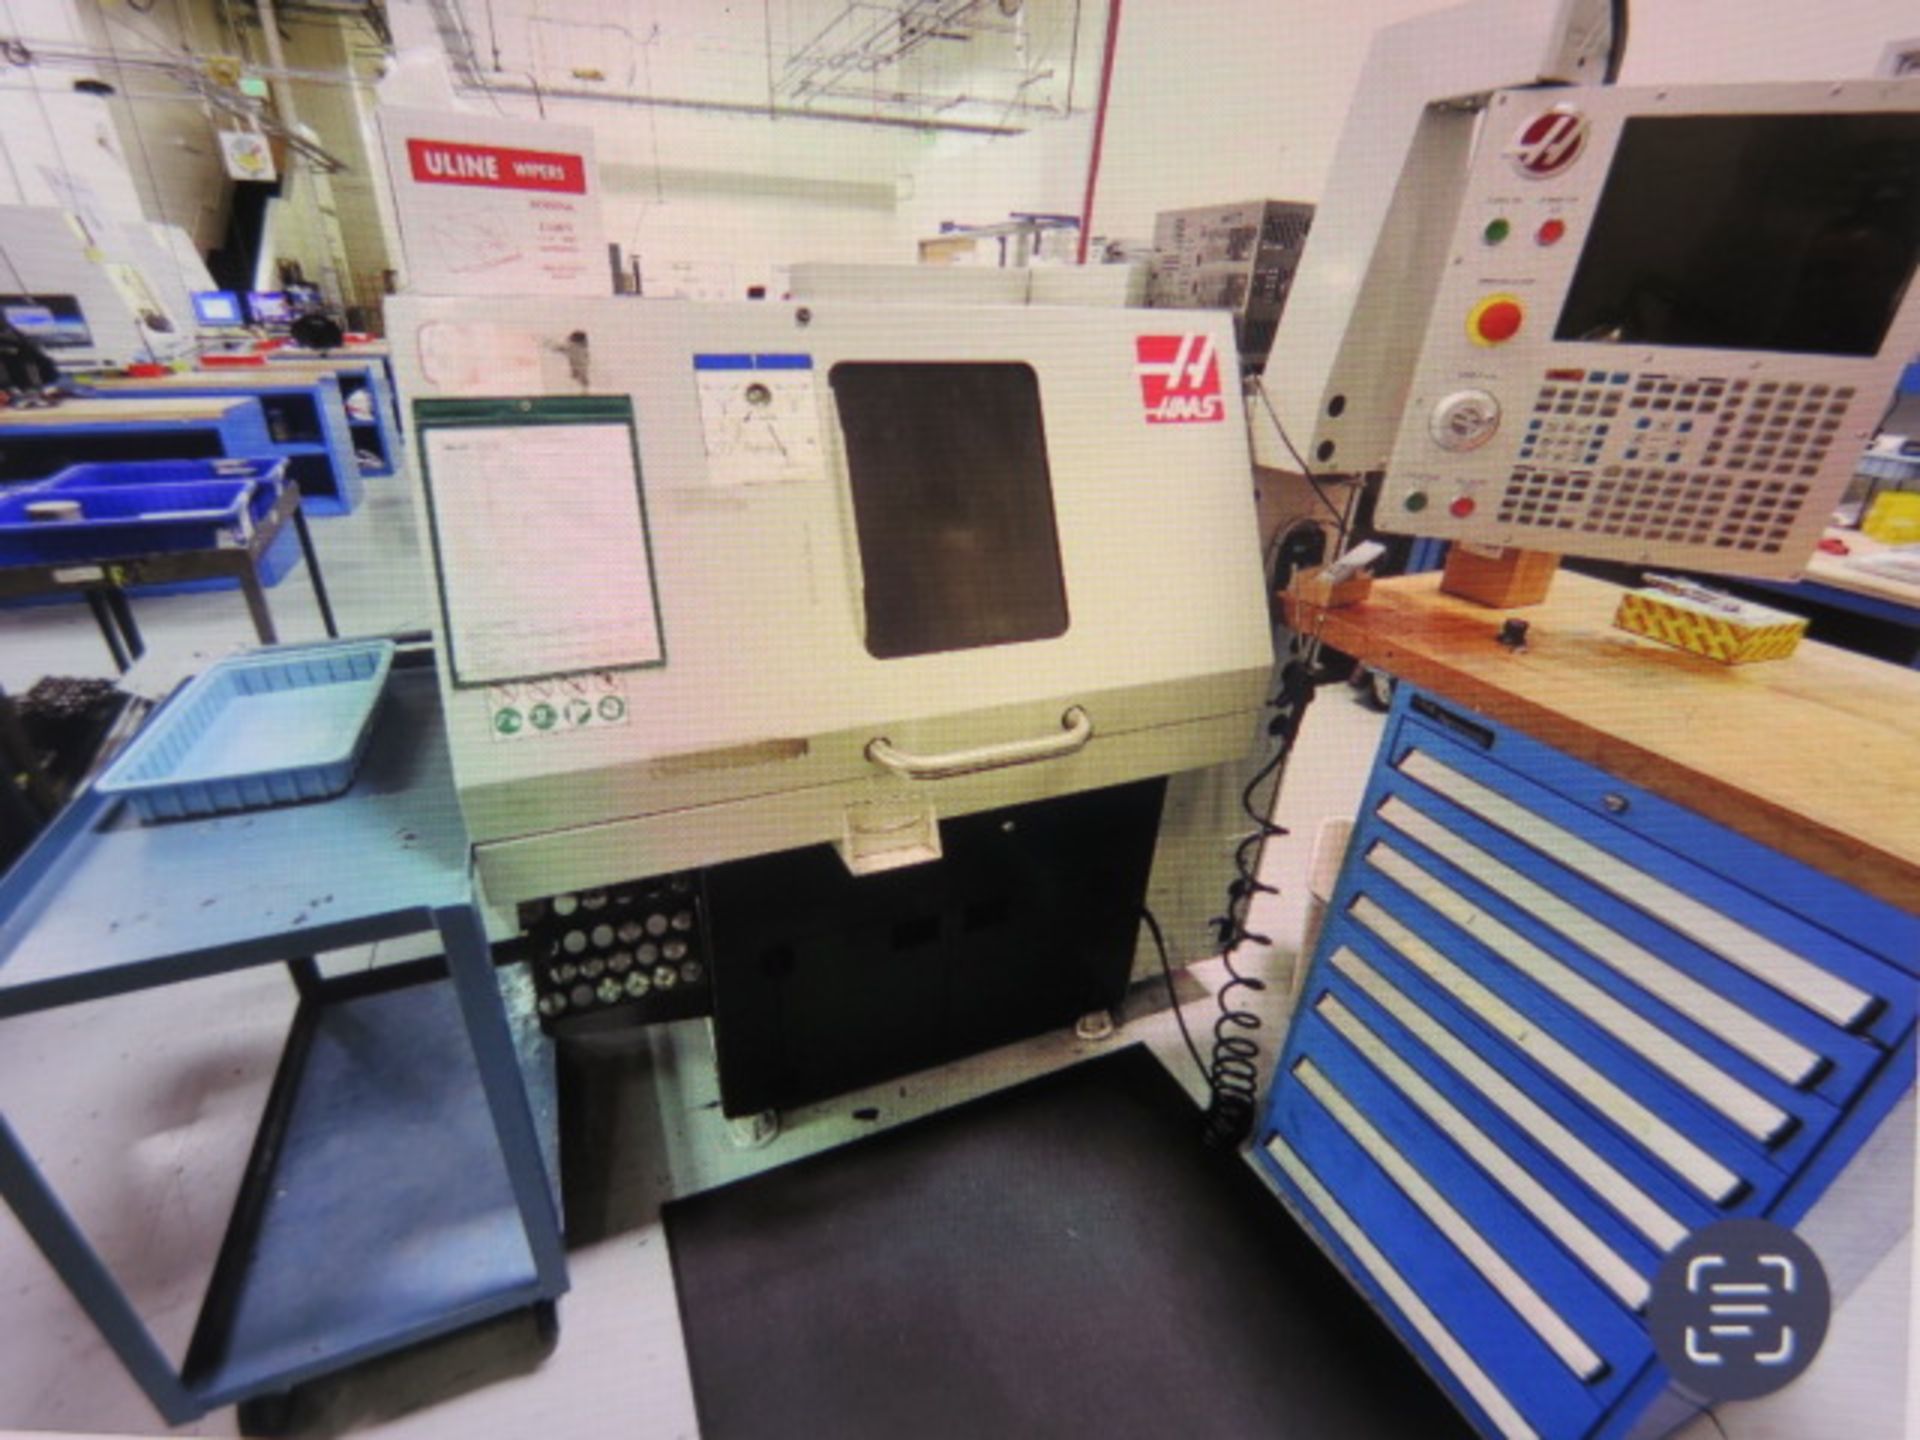 2018 Haas CL-1 CNC Chucker Office Lathe s/n 3110038 w/Haas Controls, 8-Station, 5C Collet,SOLD AS IS - Image 4 of 12